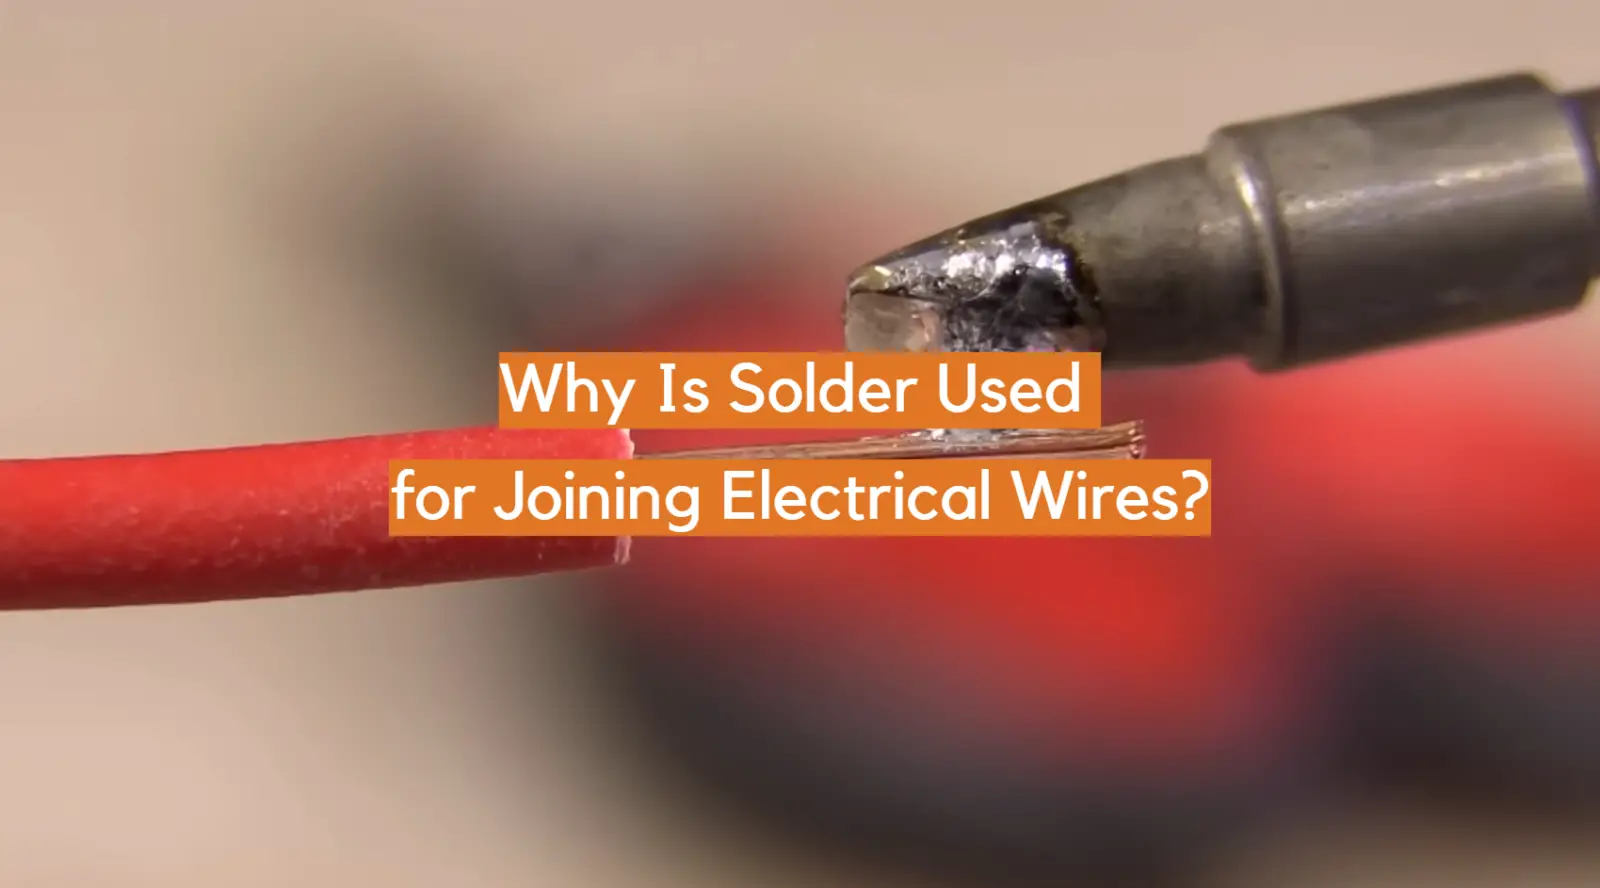 Why Is Solder Used for Joining Electrical Wires?